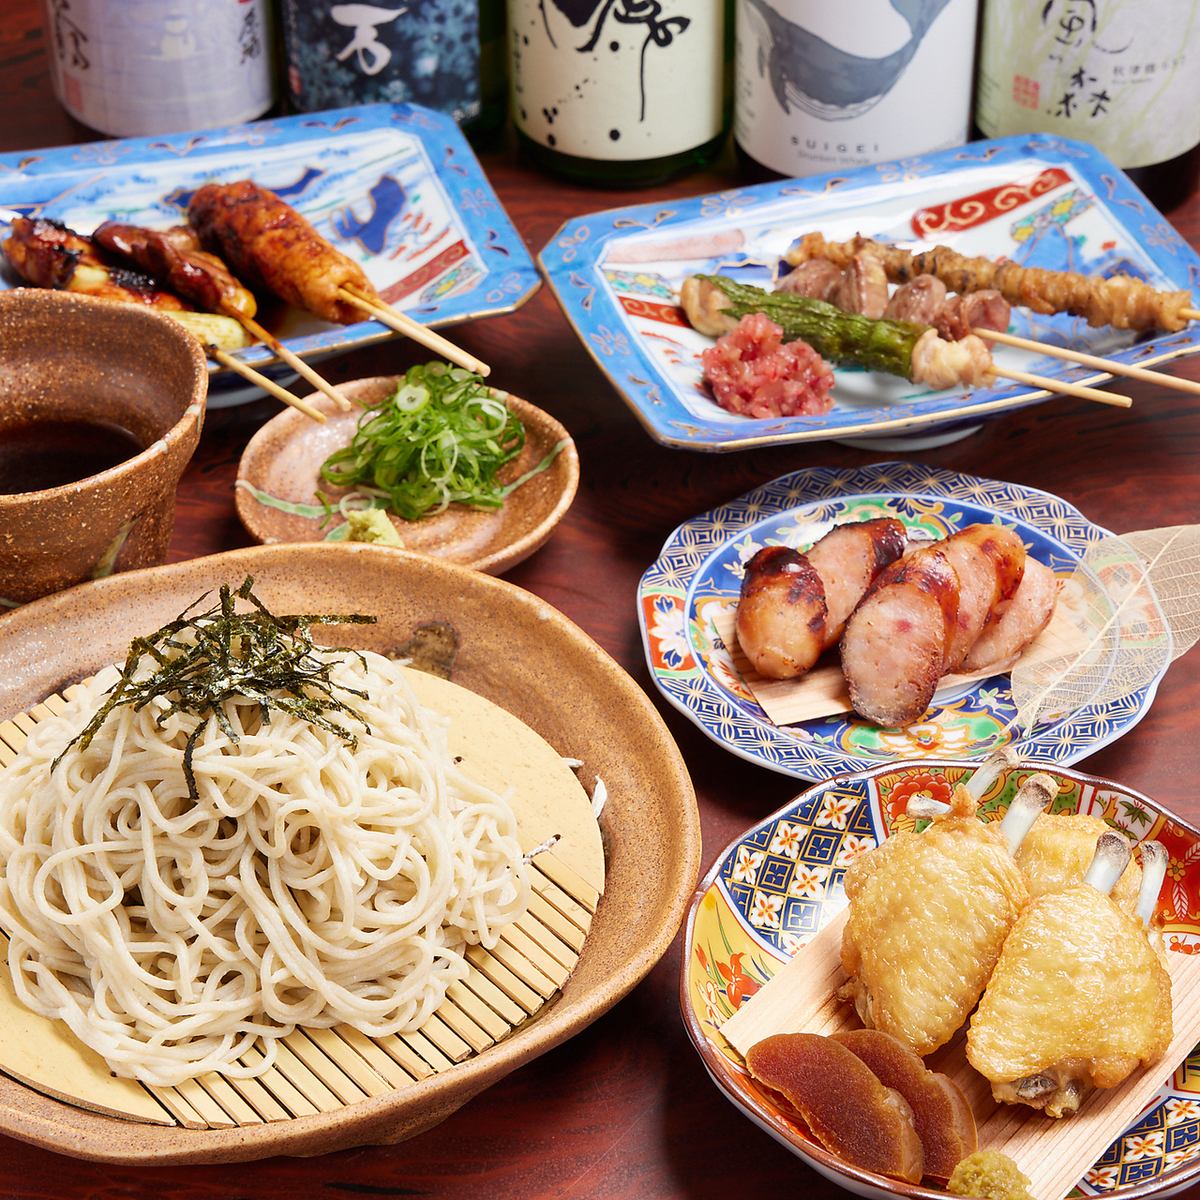 The restaurant's specialty, "Nihachi Soba," is a fragrant dish made from coarsely ground buckwheat flour from Ryuo, Shiga Prefecture.